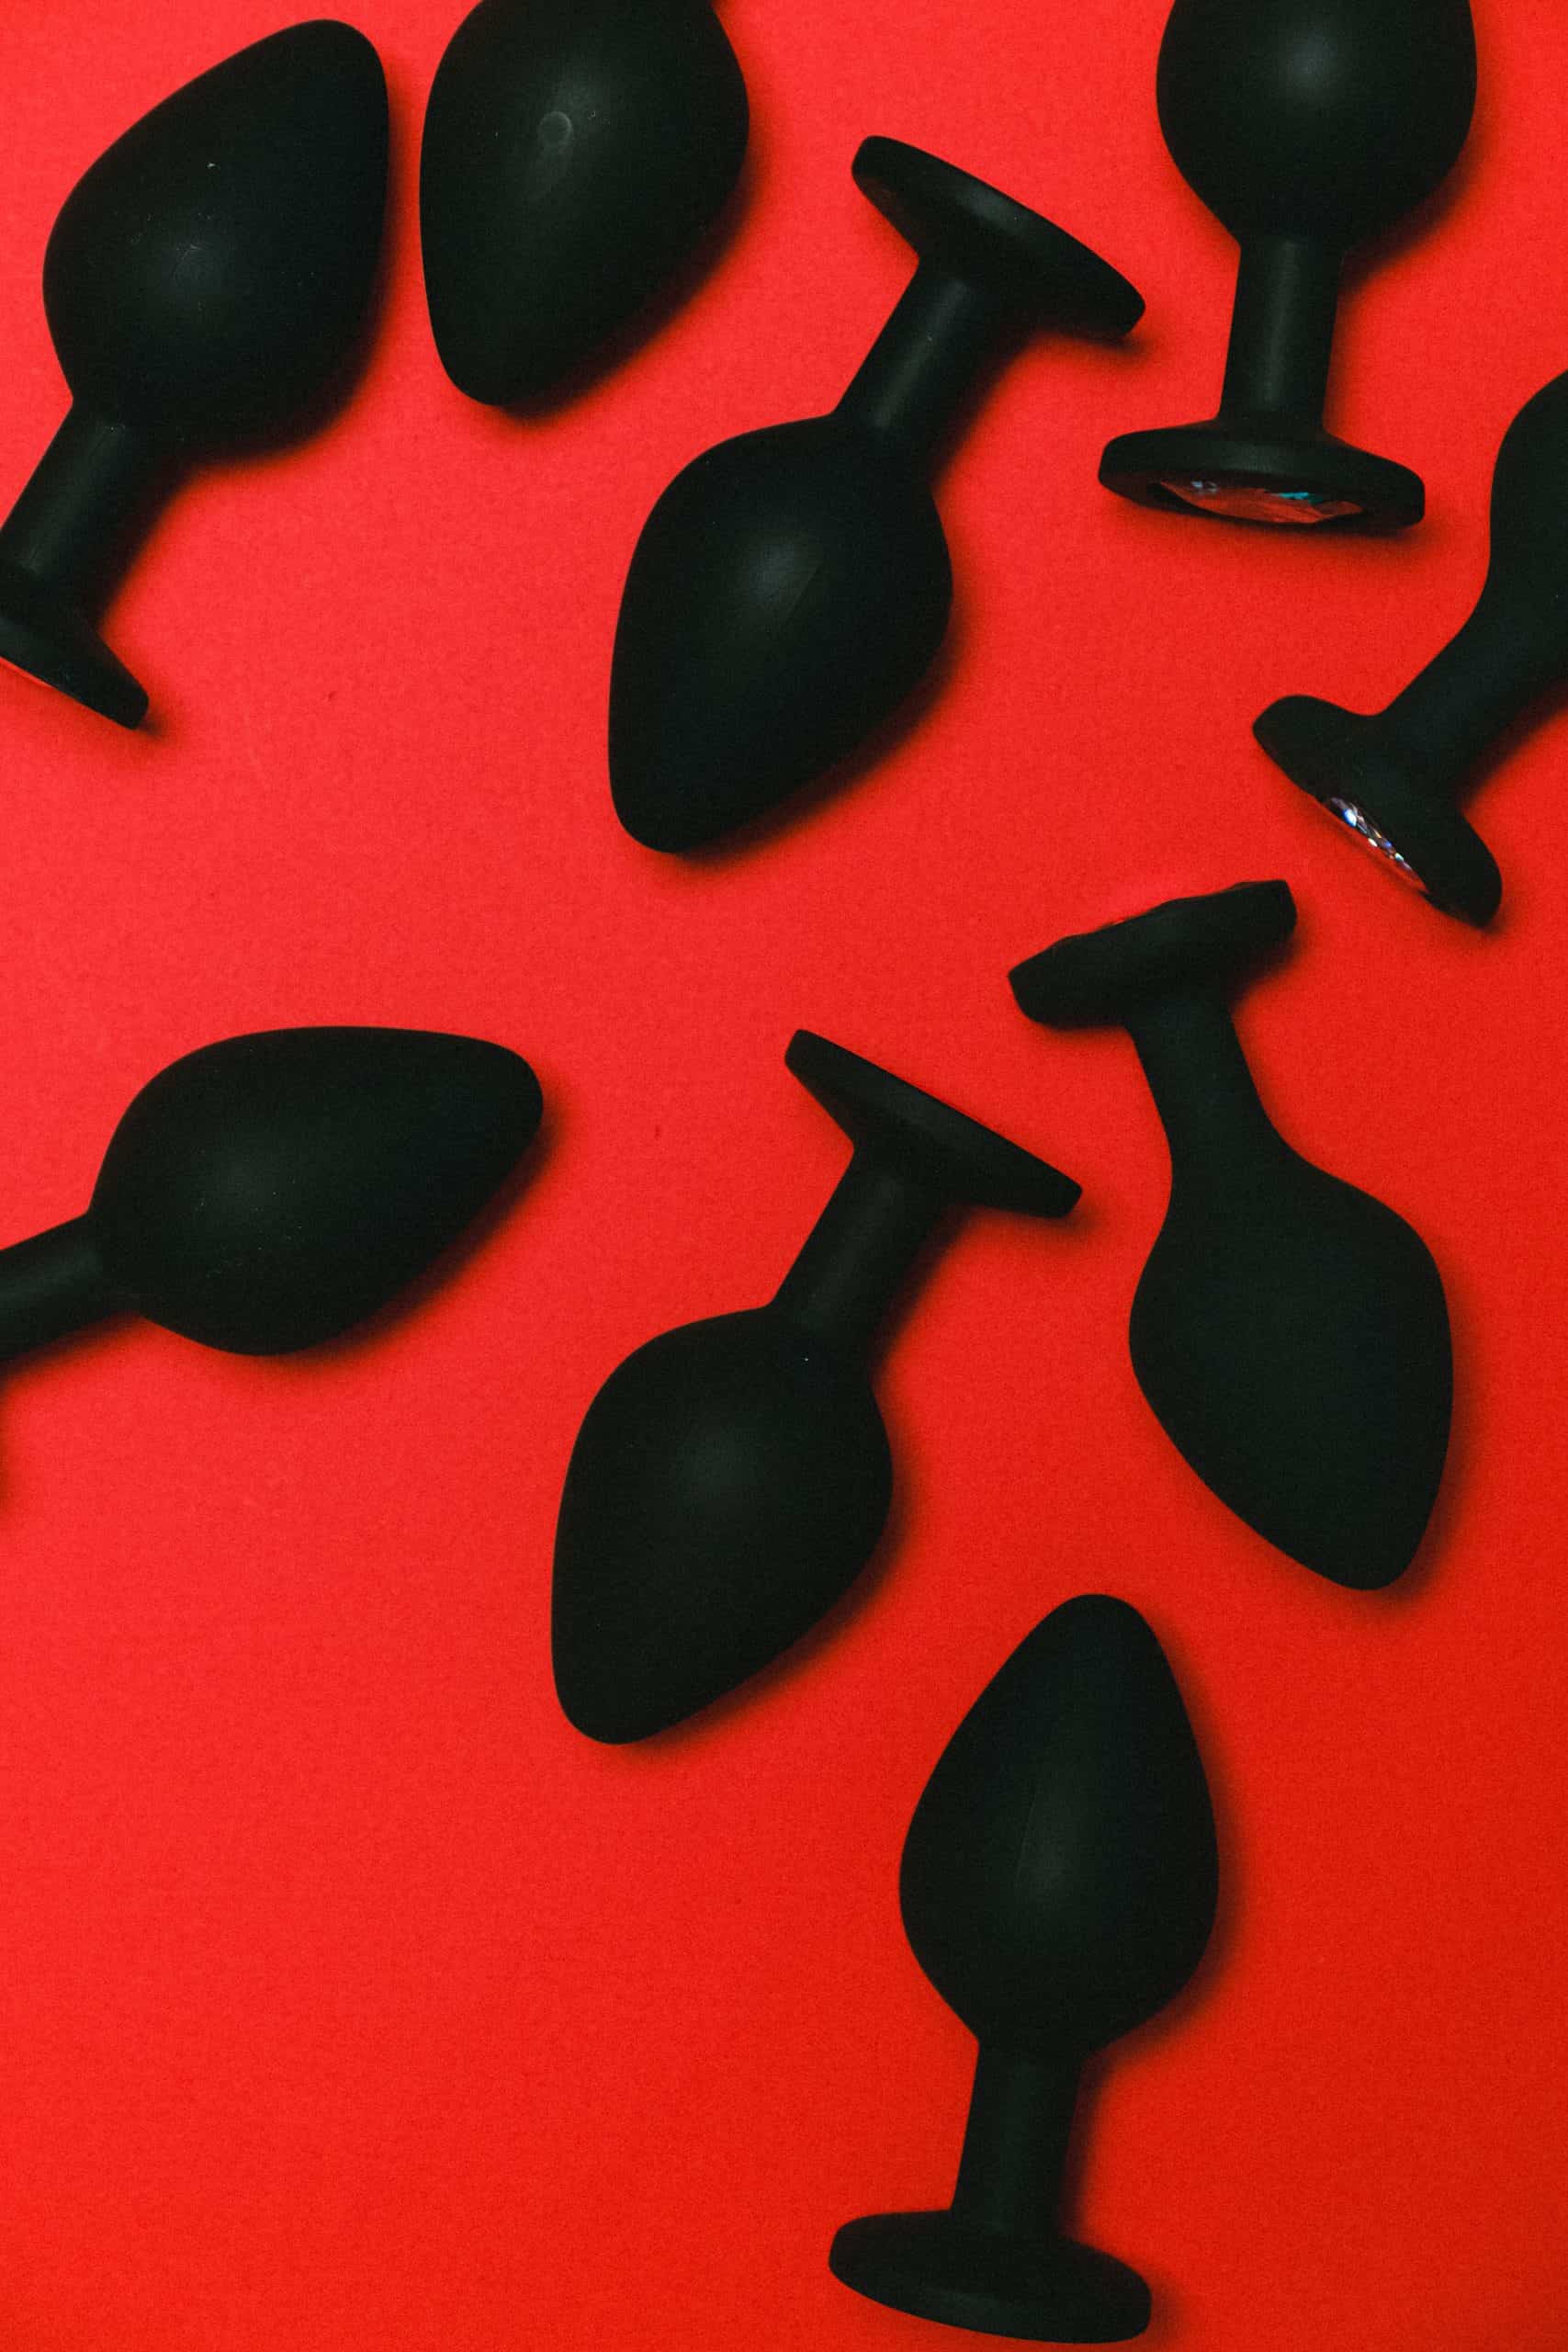 Black Anal Sex Toys in A Red Background